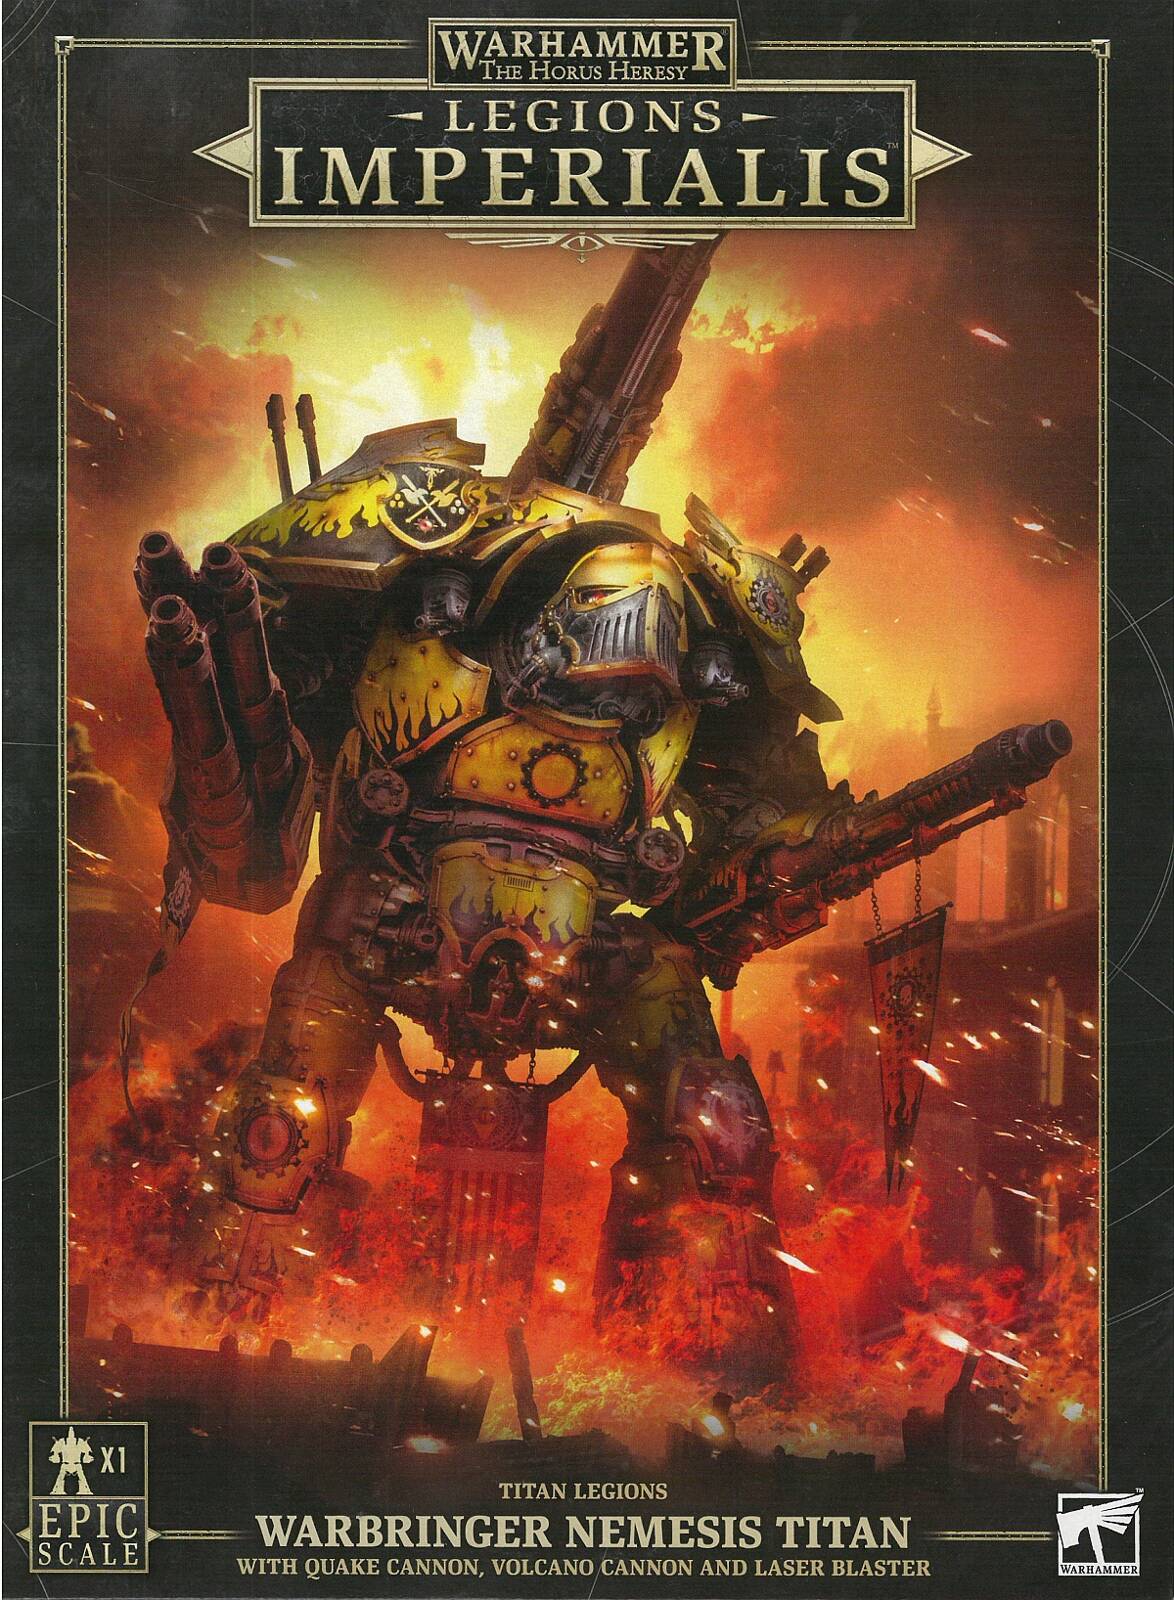 Warhammer: The Horus Heresy: Legions Imperialis: Warbringer Nemesis Titan with Quake Cannon, Volcano Cannon and Laser Blaster 